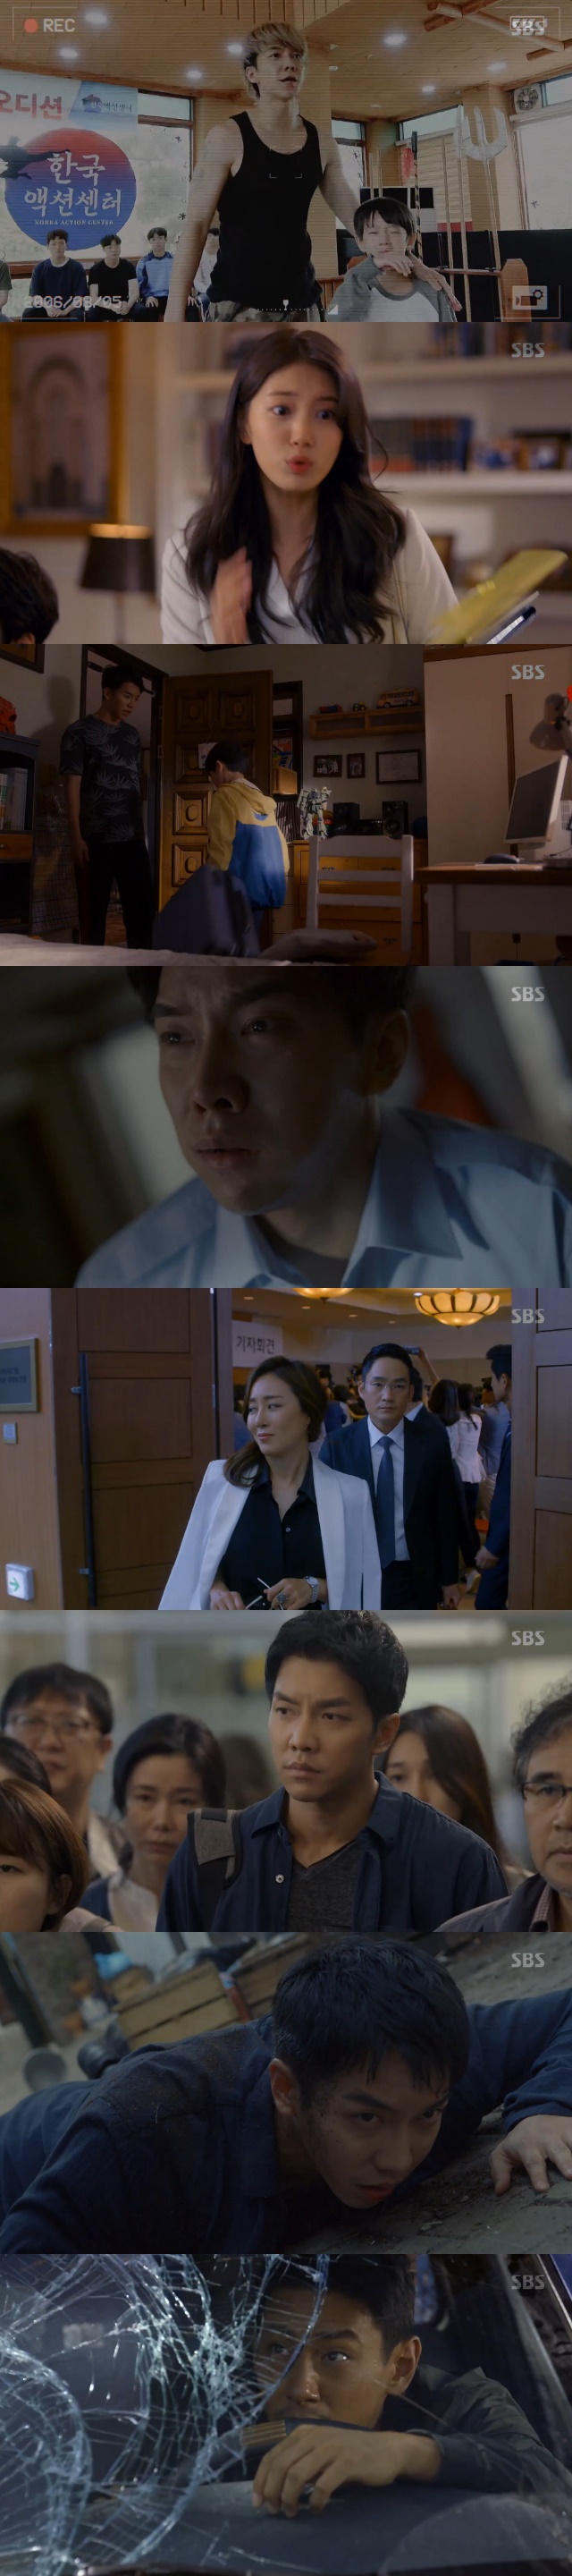 Lee Seung-gi has a hunch there is a conspiracy in his nephews Planes crash.In the first episode of SBSs new gilt drama, Vagabond (playplayplay by Jang Young-chul, Jung Kyung-soon/directed Yoo In-sik), which aired on September 20, a picture of Cha Dal-geon (Lee Seung-gi), suffering from his nephews death, was drawn.On the day of the broadcast, a picture of a cart preparing a shooting error in a desolate desert was revealed.Then a limousine passed, and Chadalgans partner blew off the wheels of the car, luring people inside out.Then a woman got out of the car, and Cha Dal-geon tried to shoot the woman, but was surprised to see the face of Gohari (Suzie).Time has flowed into the past, and Cha Dal-geon was auditioning for the Korea Action Center.Cha Dal-gun, who raised his son alone, started his stuntman life with a brick sticking, but he showed his extraordinary motivation.He was not able to live with his nephew, but he stopped driving a taxi with a stuntman.My nephew accidentally saw that the Jackie Chan data that Cha Dal-geon kept was abandoned and tried to give up going to Morocco as a childrens Taekwondo demonstration team.I dont think the money will pay for it. Youre 11 years old. Be a little pathetic.I have to spend a lot on The Uncle, why do you like adults? But I did not try to listen easily.NIS Black Agent Ko Hae-ri was working under the guise of a contract worker at the States Morocco Korea Embassy.He repeatedly made mistakes and mistakes and was treated pathetic by his employees, but he continued his work by recovering hidden cameras from behind.The nephew eventually turned his mind around and boarded Planes to Morocco.At that time, a man in Lisbon, Portugal, secretly calls Korea Airlines to avoid peoples eyes and says, We must prevent the B357 Planes takeoff to Morocco.The terrorists have been on board. Planes will fall. But the terrorist was found and killed.Eventually Planes crashed, and Jessica Lee (Moon Jung-hee), who was working hard on the next generation fighter business, took advantage of the highlands.Chadalgan, who was eating at the restaurant, was devastated when he accidentally heard about the Planes crash on the news.He left for Morocco to hold a joint memorial service as a bereaved family member, and accidentally met a person who boarded Planes with his nephew in the bathroom.Lee Ha-na